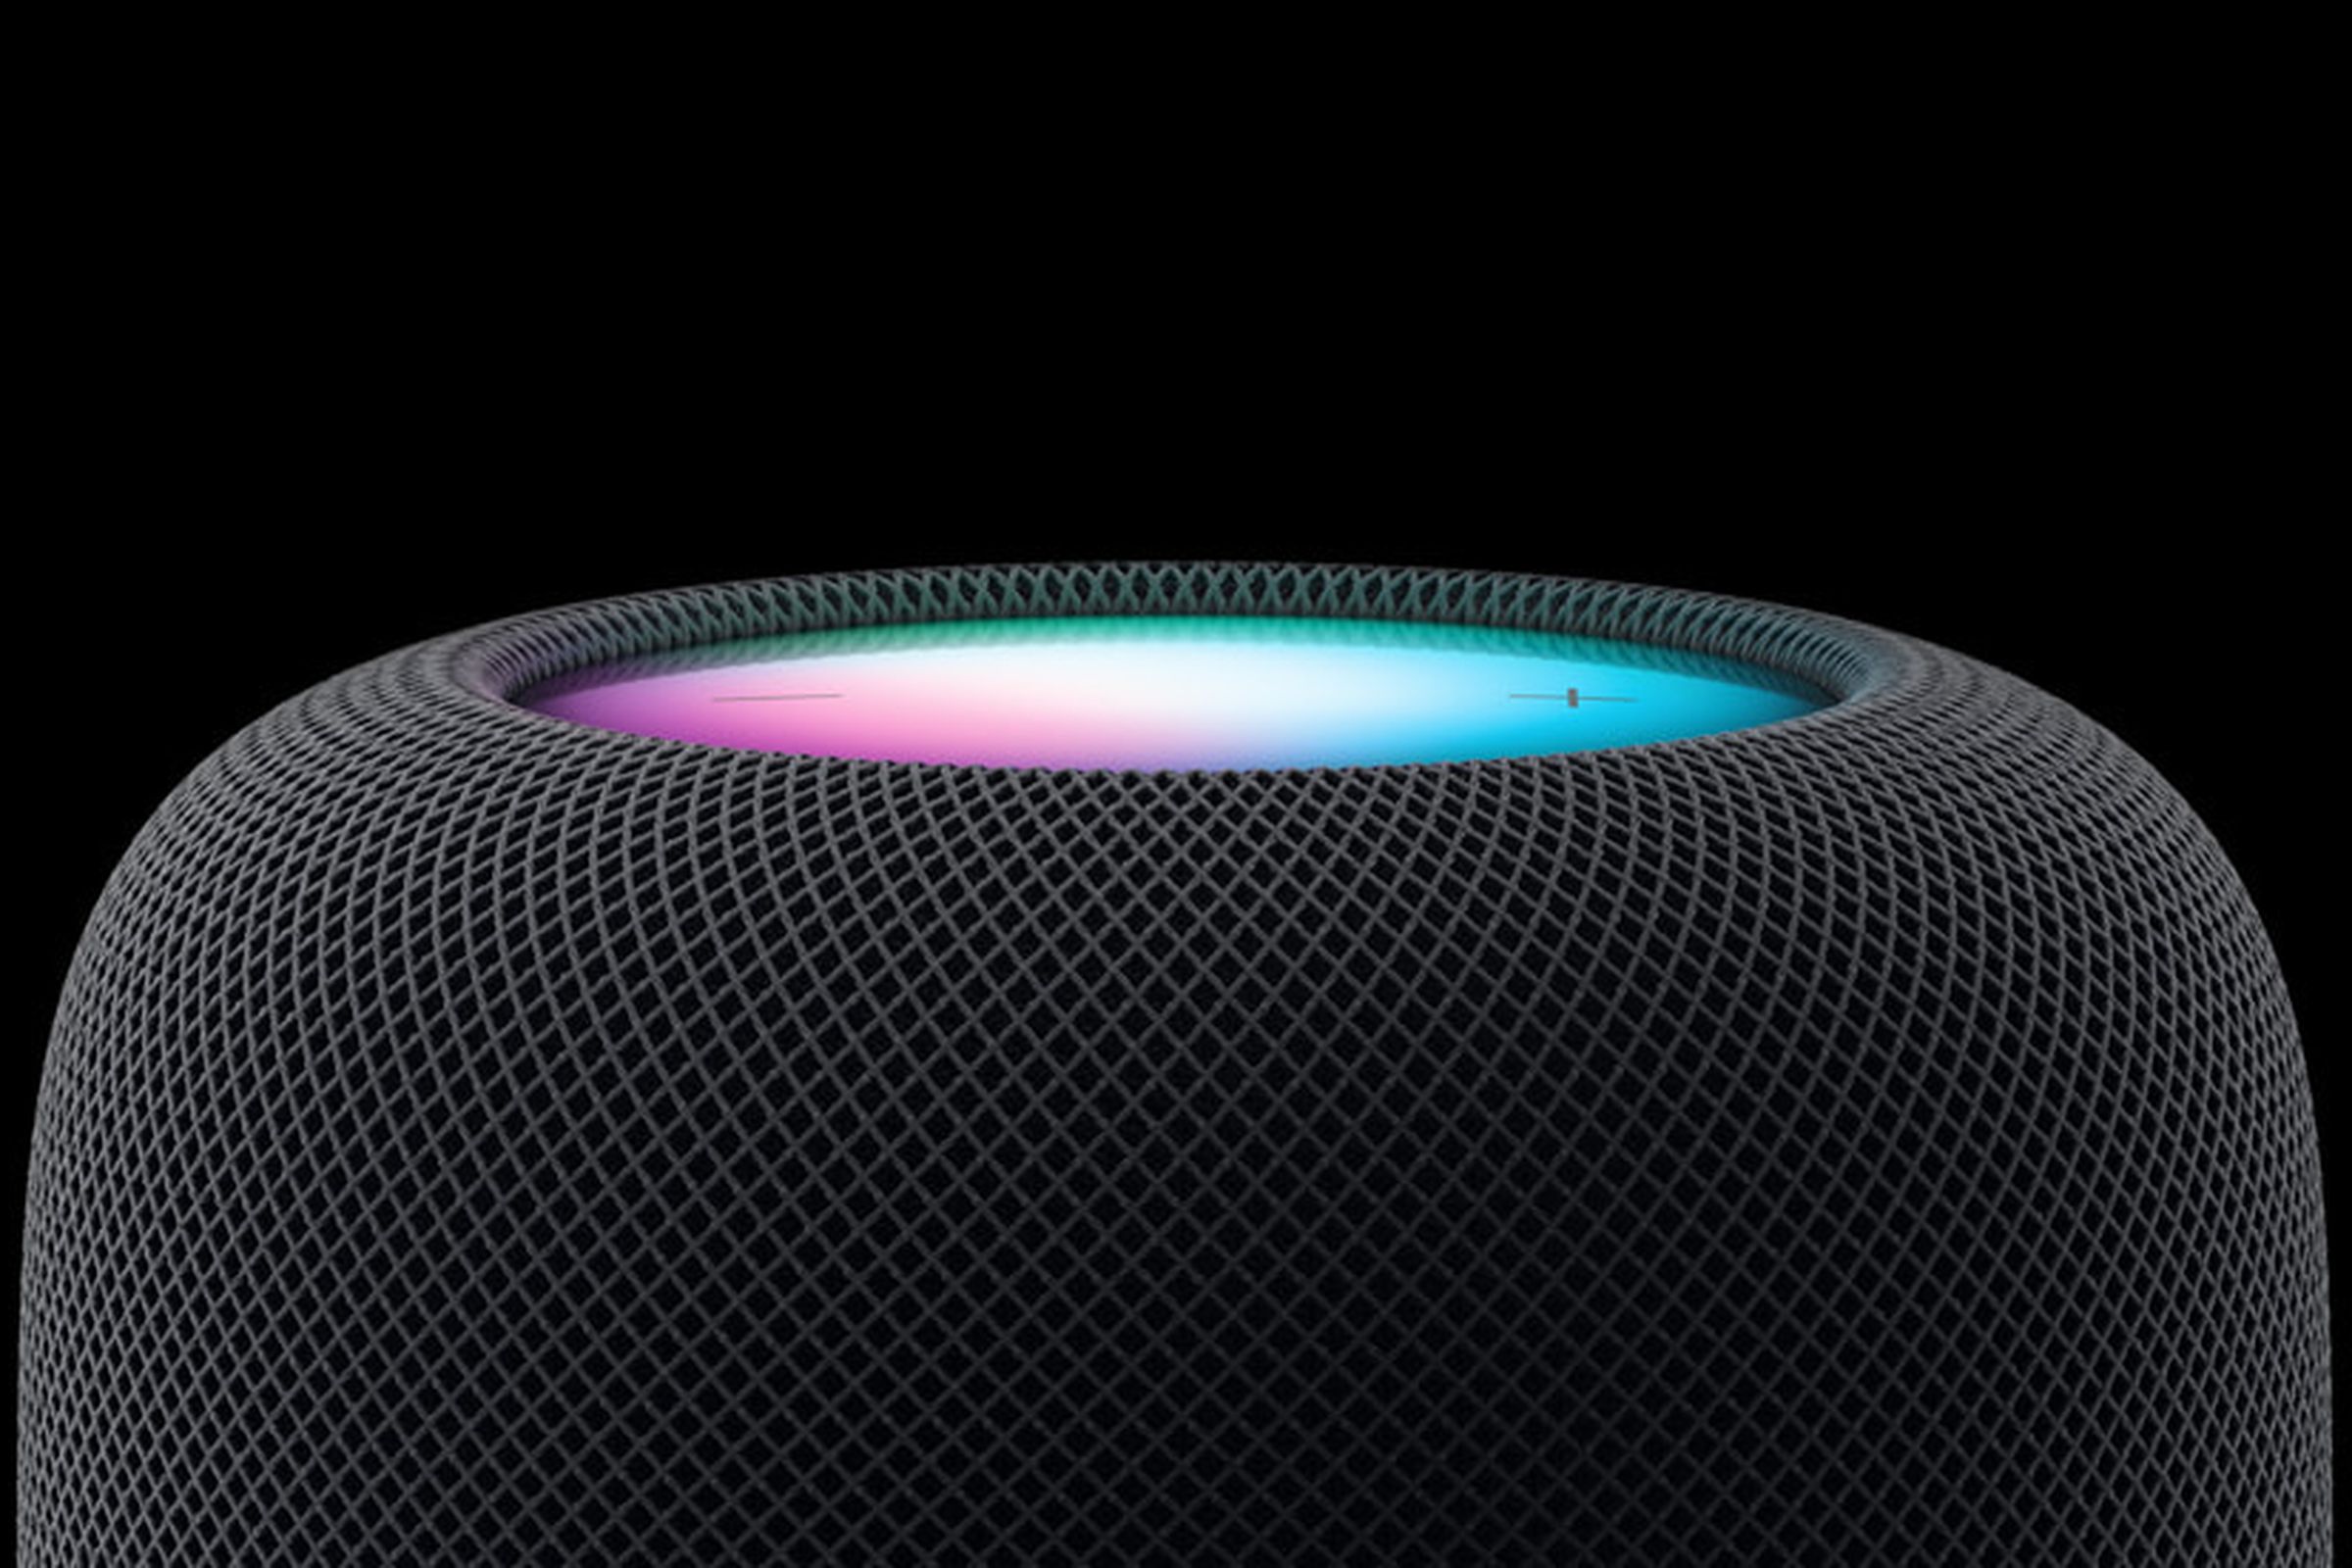 Here’s how to preorder Apple’s new HomePod